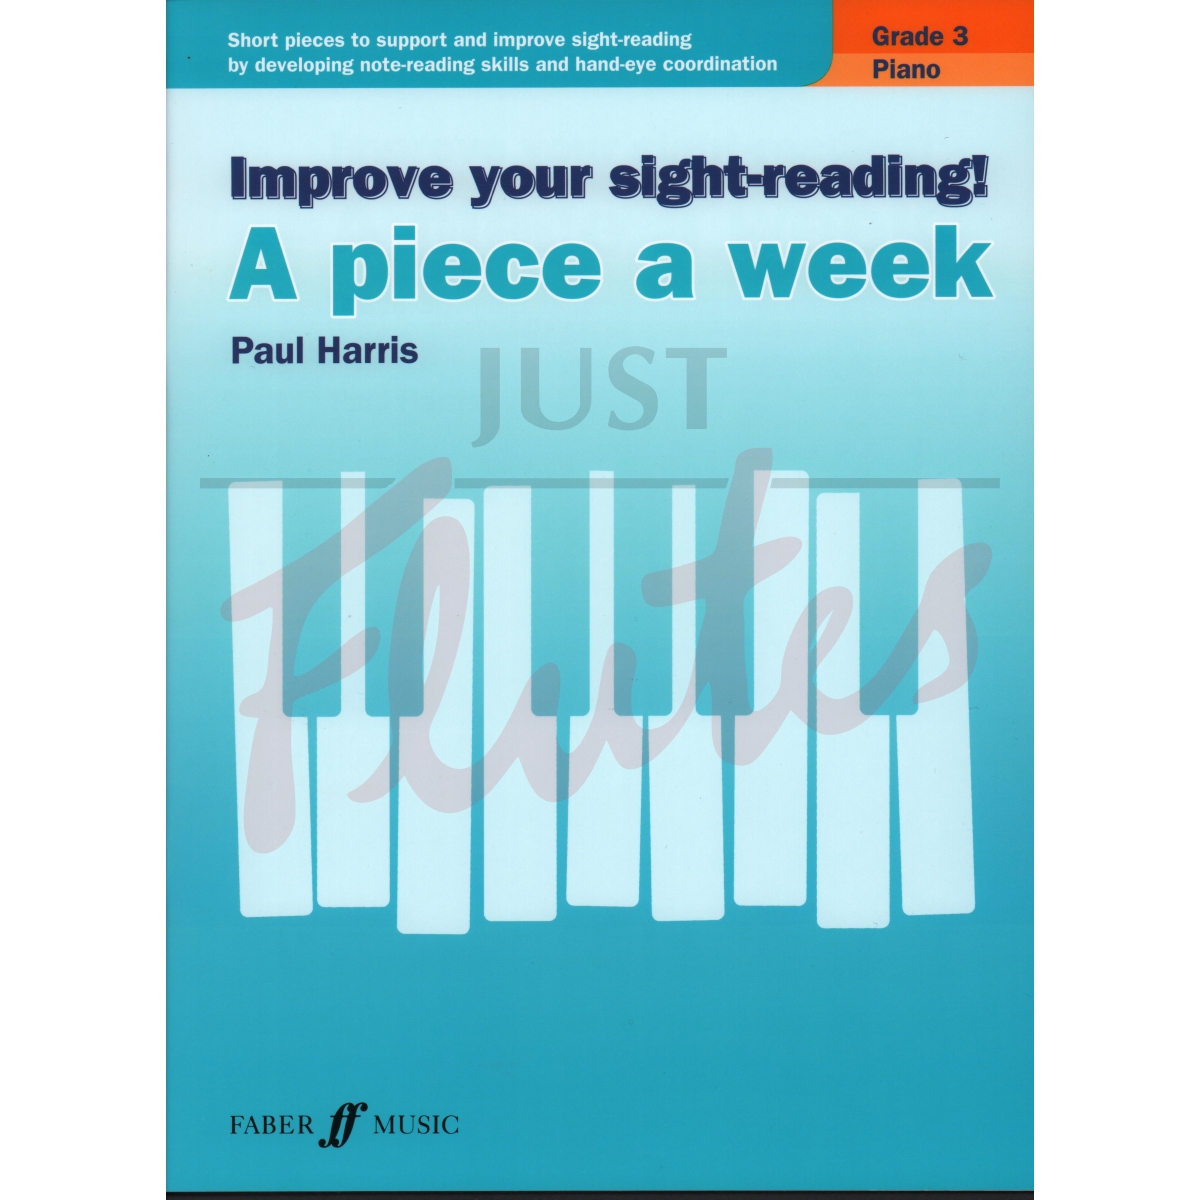 Improve your Sight-Reading! A Piece a Week Piano Grade 3